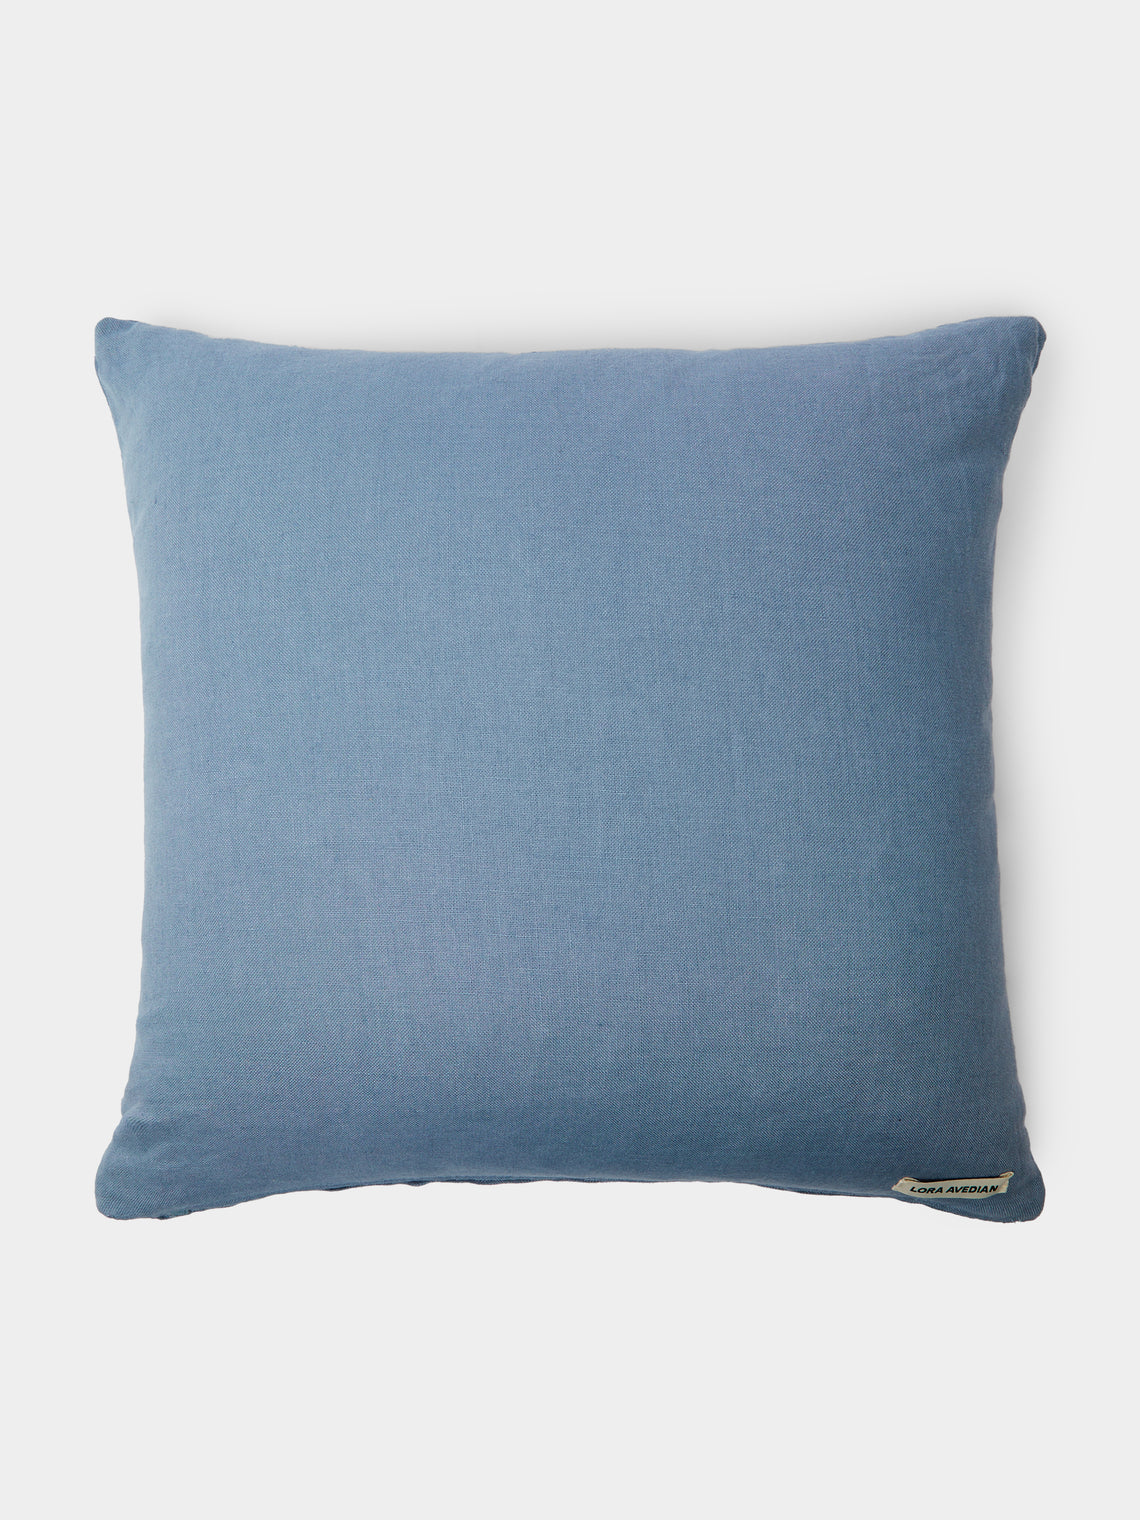 Lora Avedian - Ode to Echinacea Hand-Embroidered Linen Cushion -  - ABASK